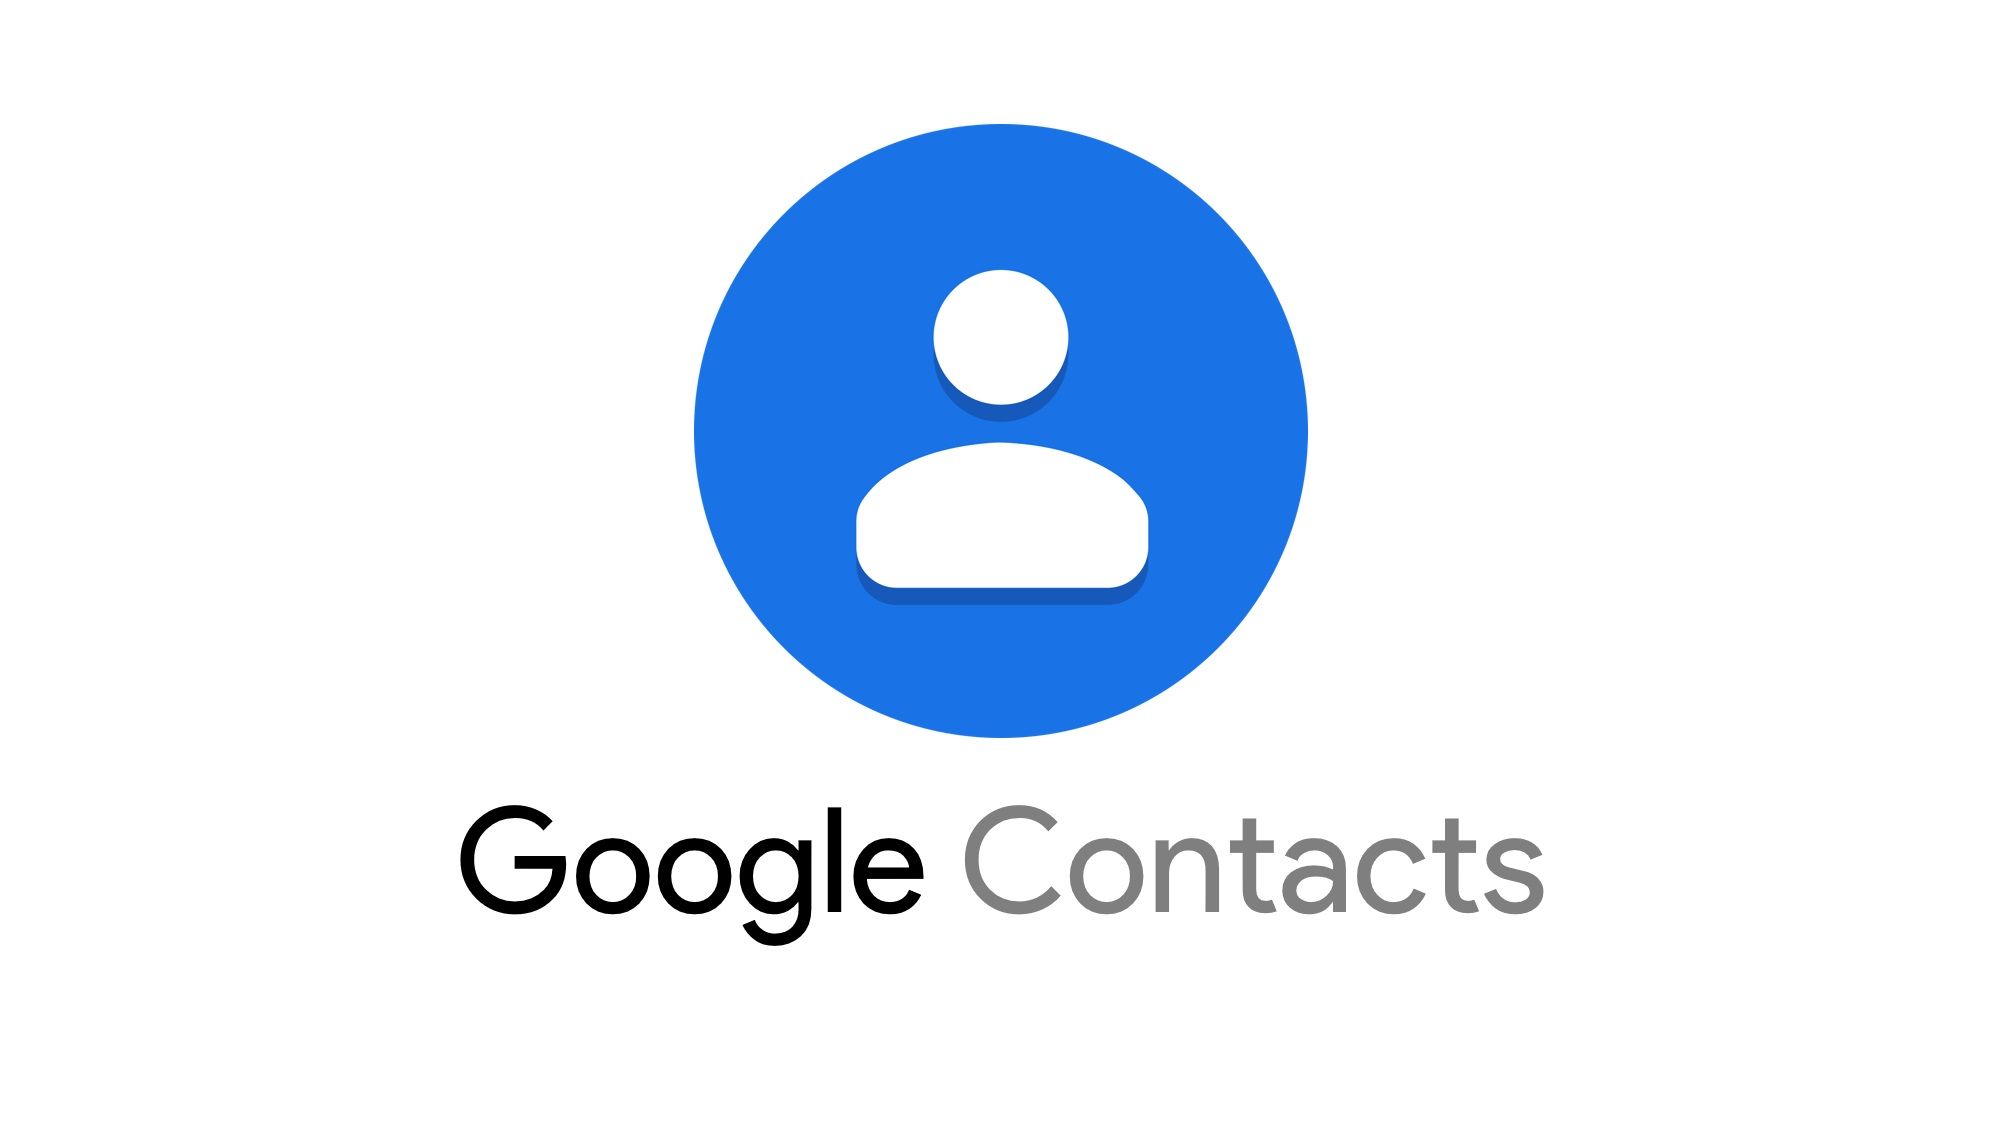 How to copy google contacts number from one Google Accounts to another